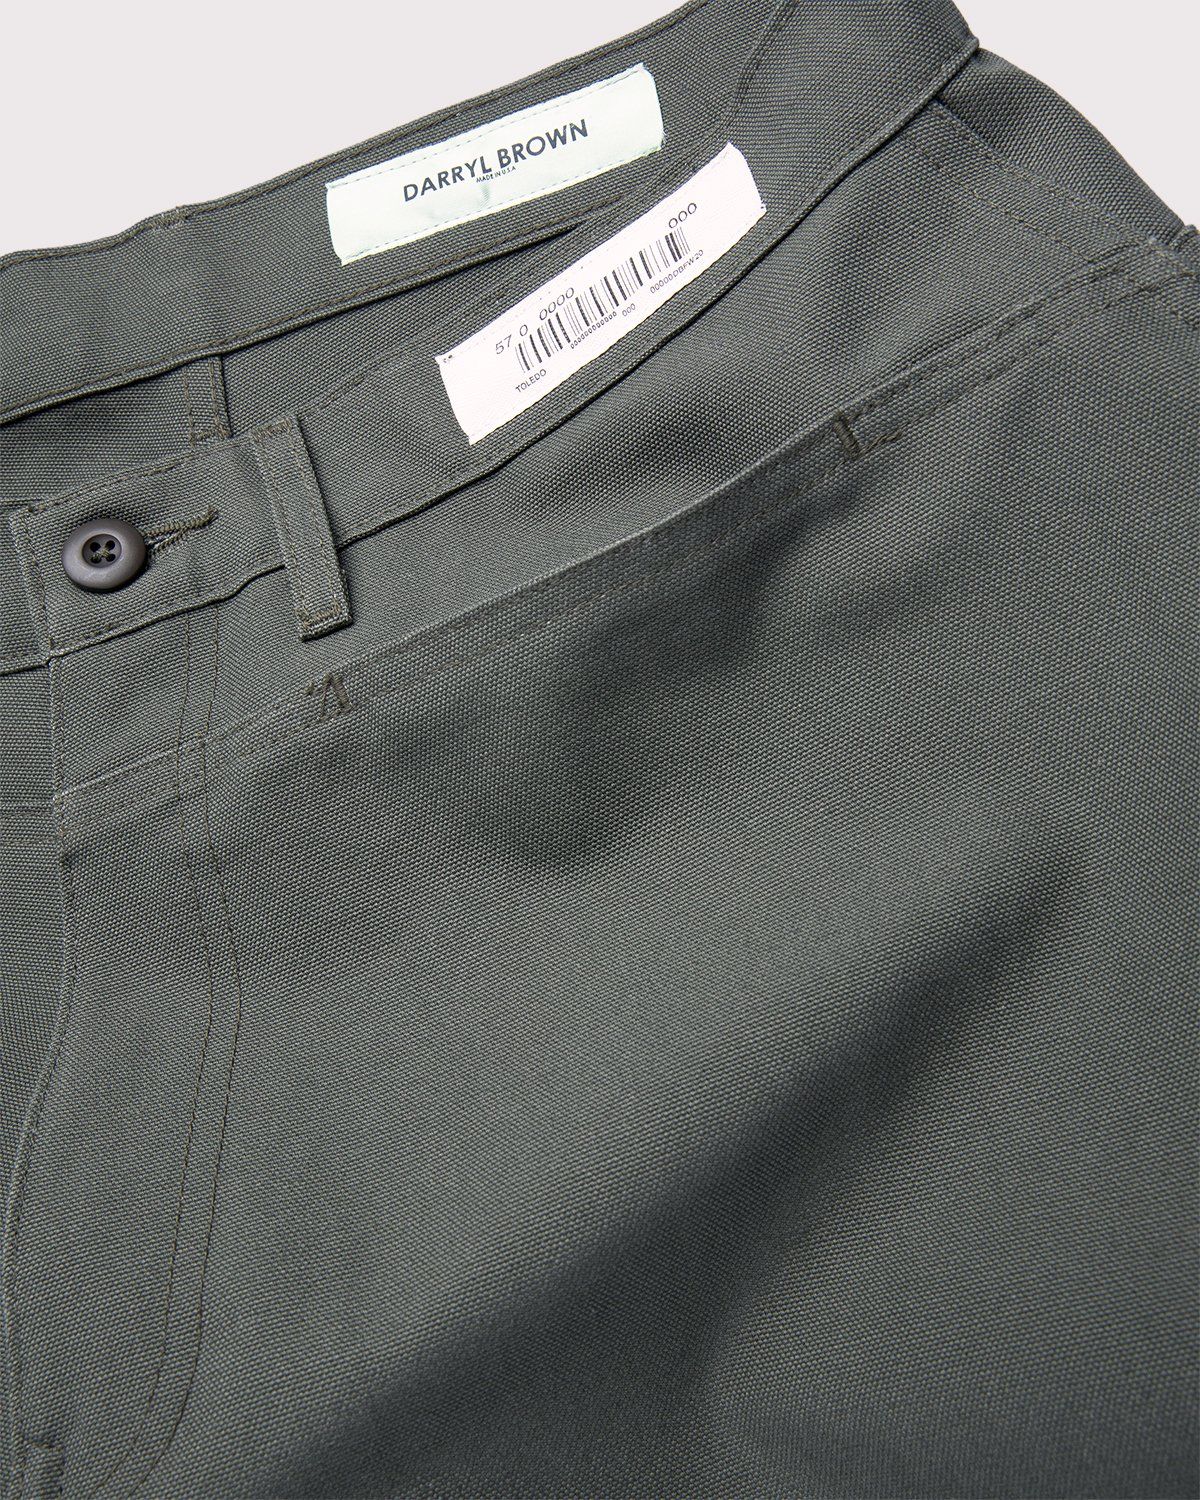 Darryl Brown – Japanese Cargo Pants Military Olive - Cargo Pants - Green - Image 3